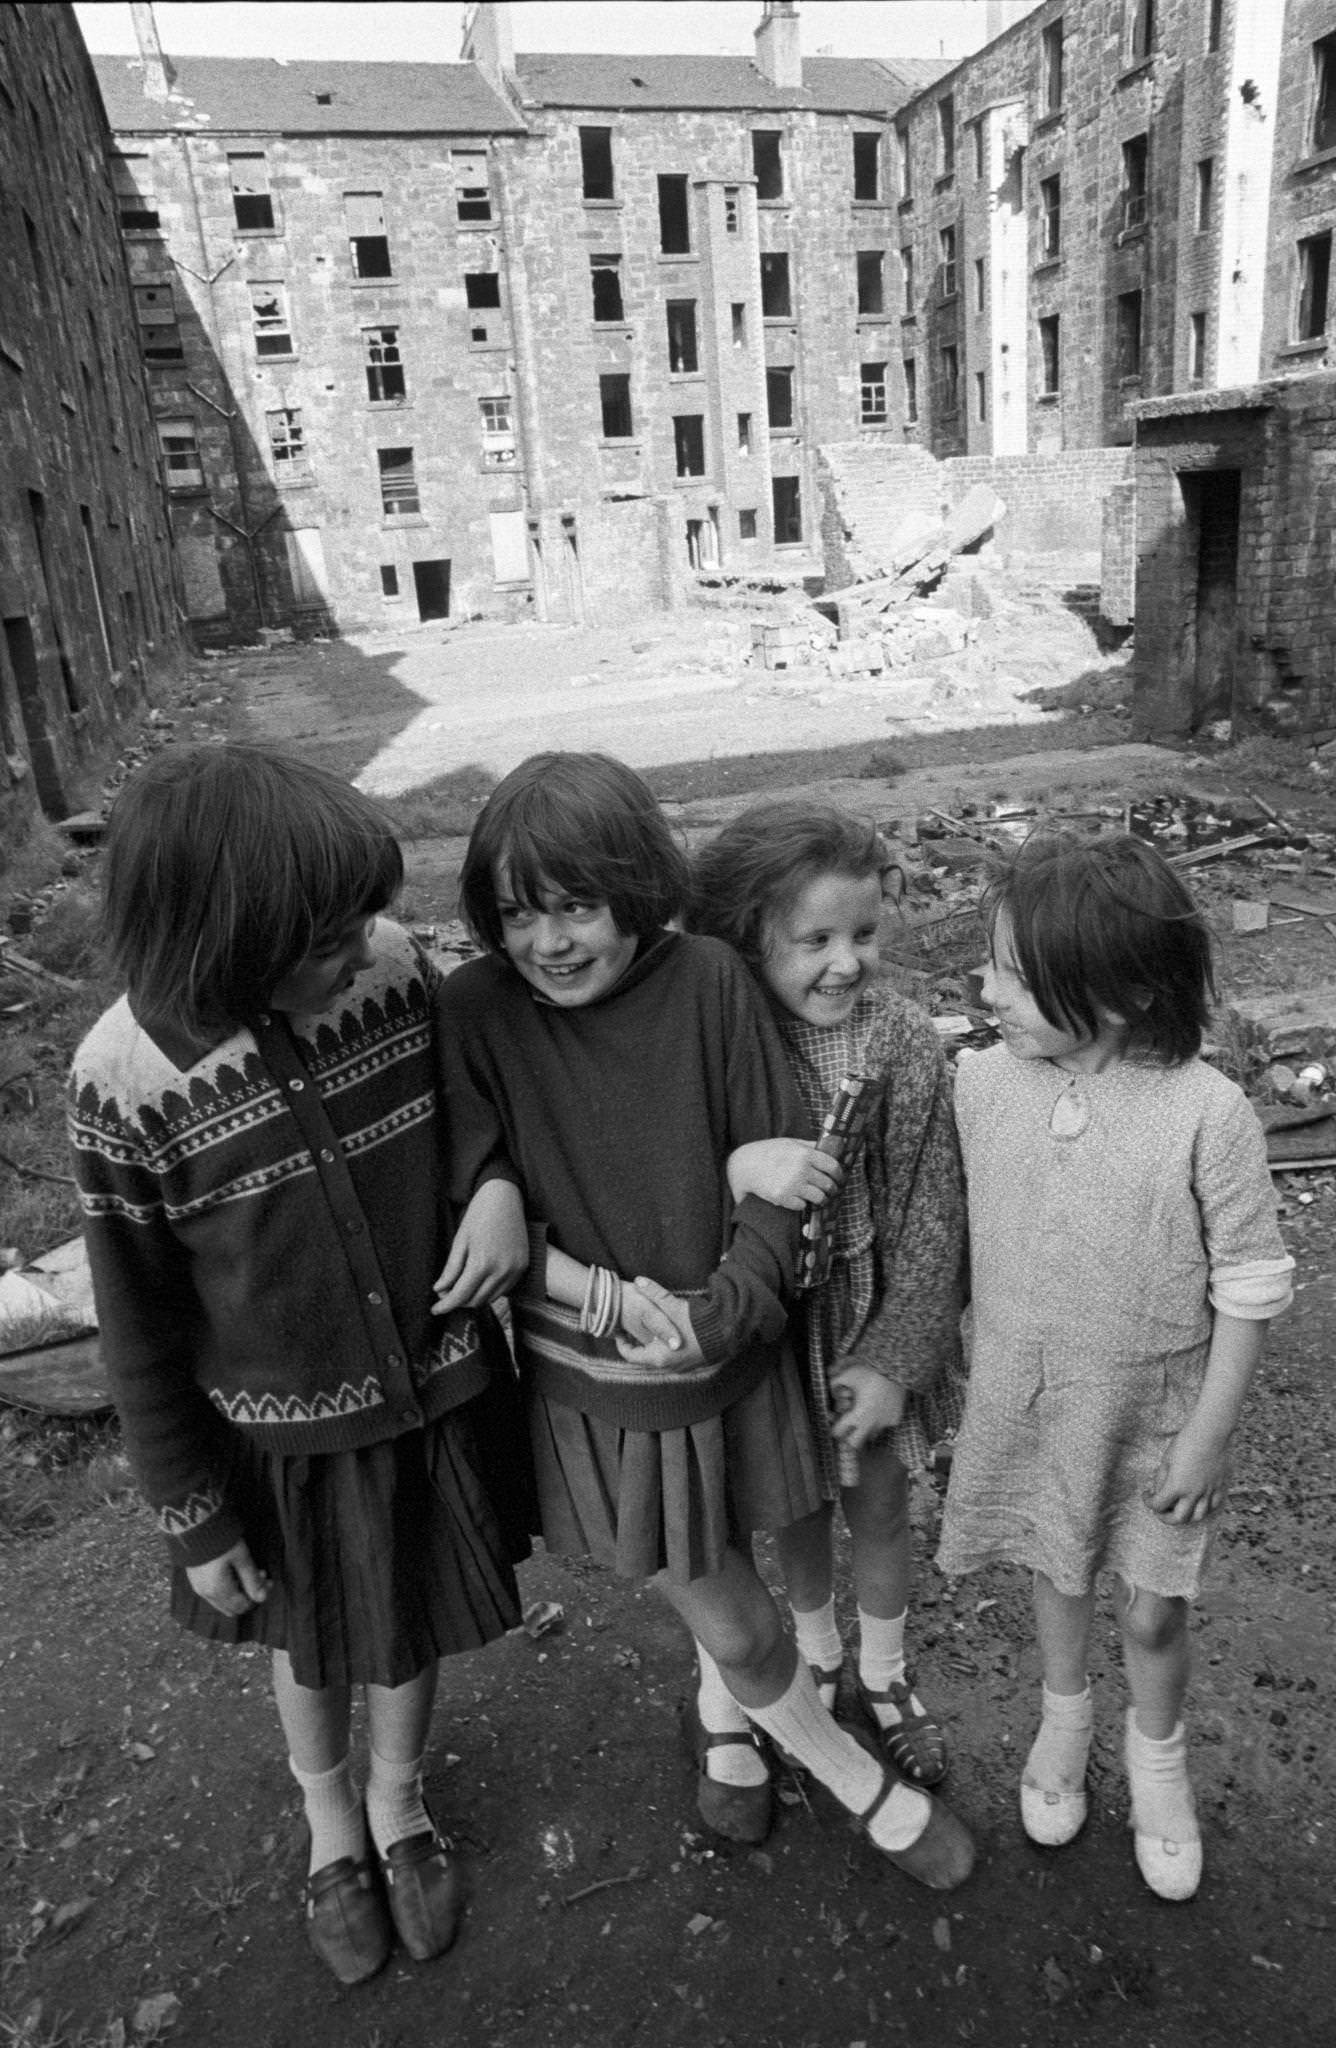 Four little girls posing in front of slum housing in the notorious Gorbals district of Glasgow in 1969.